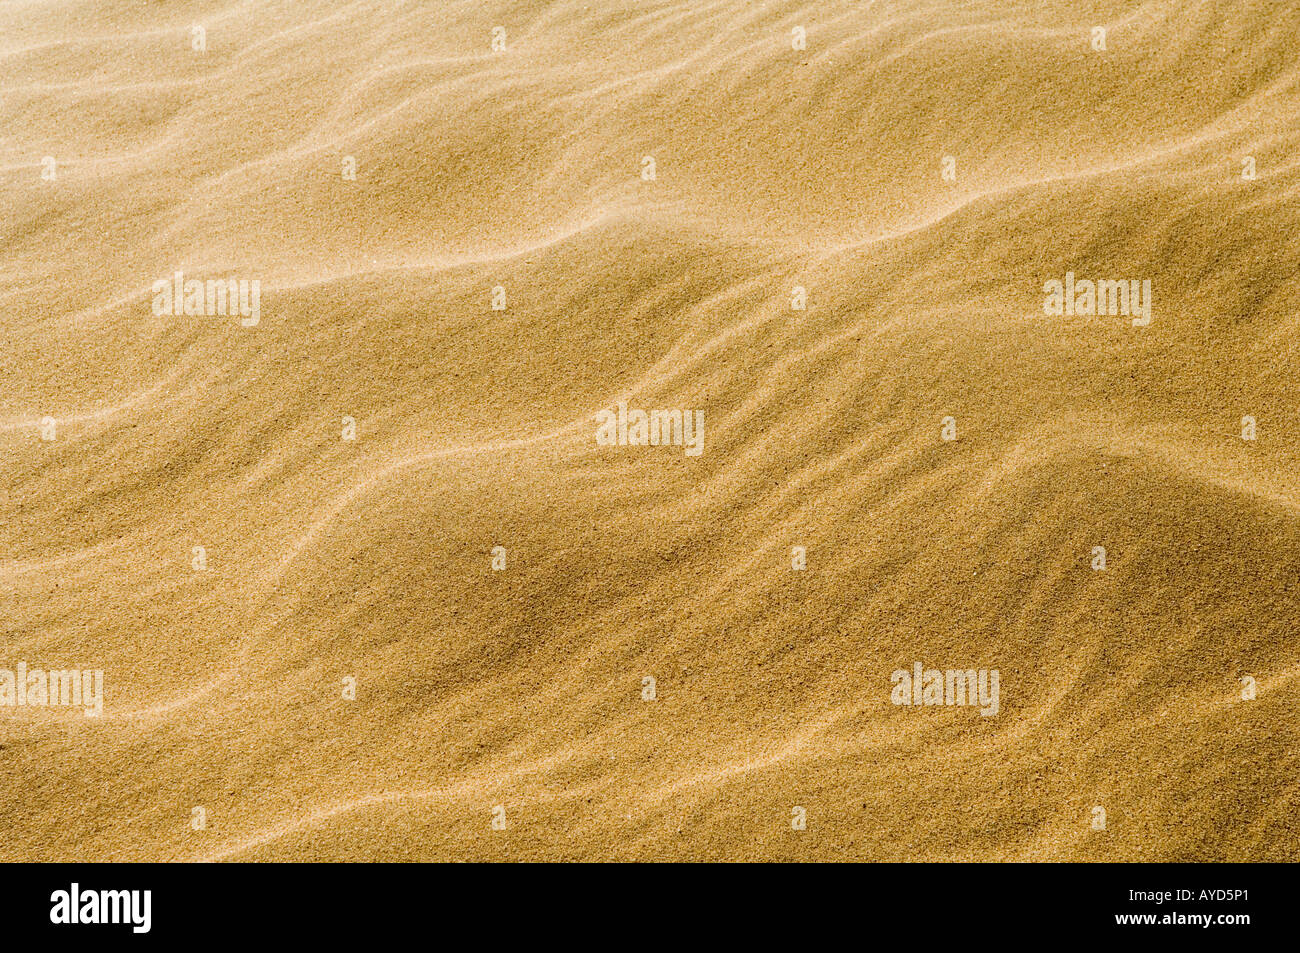 Ripples in the sand caused by the tide and wind Stock Photo